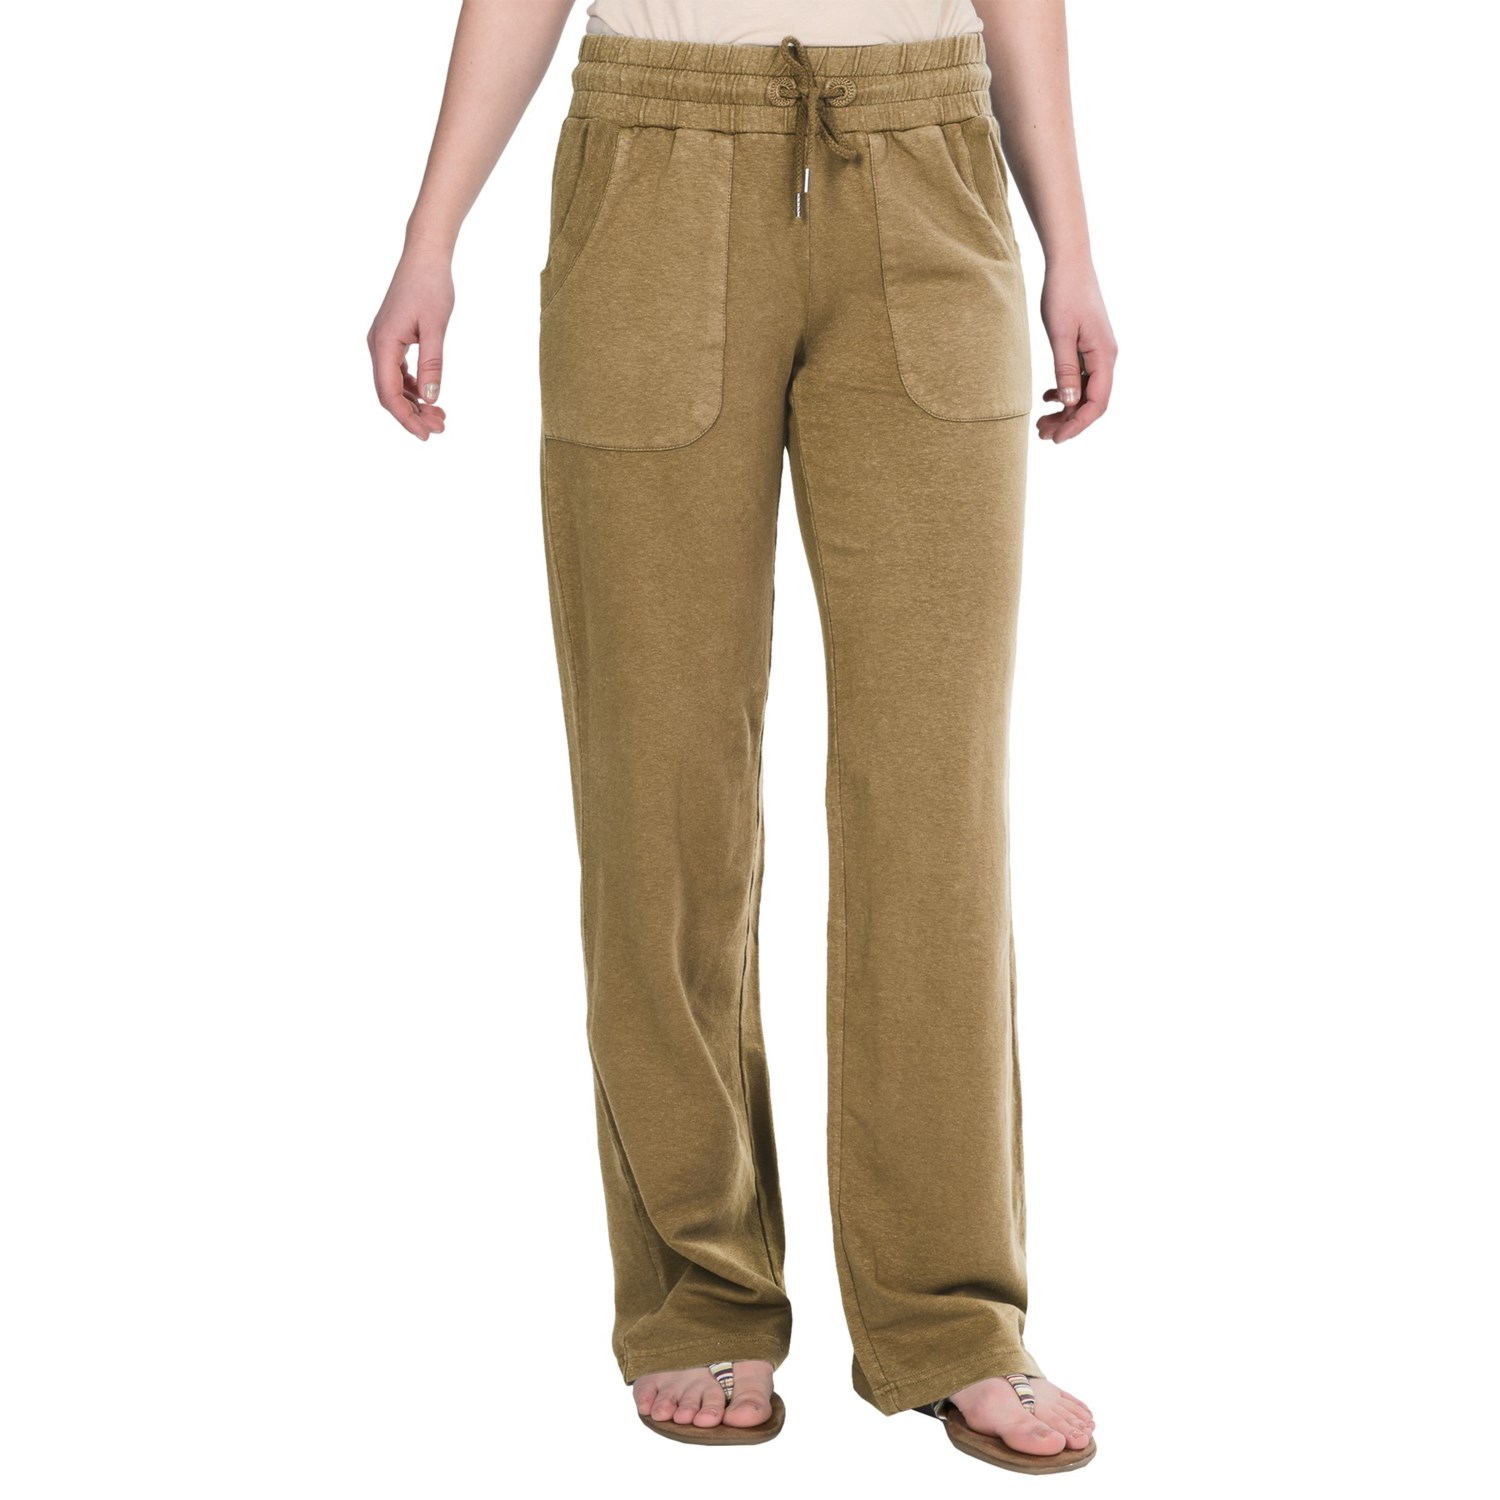 Gramicci Amber Pants (For Women) 6824X - Save 60%